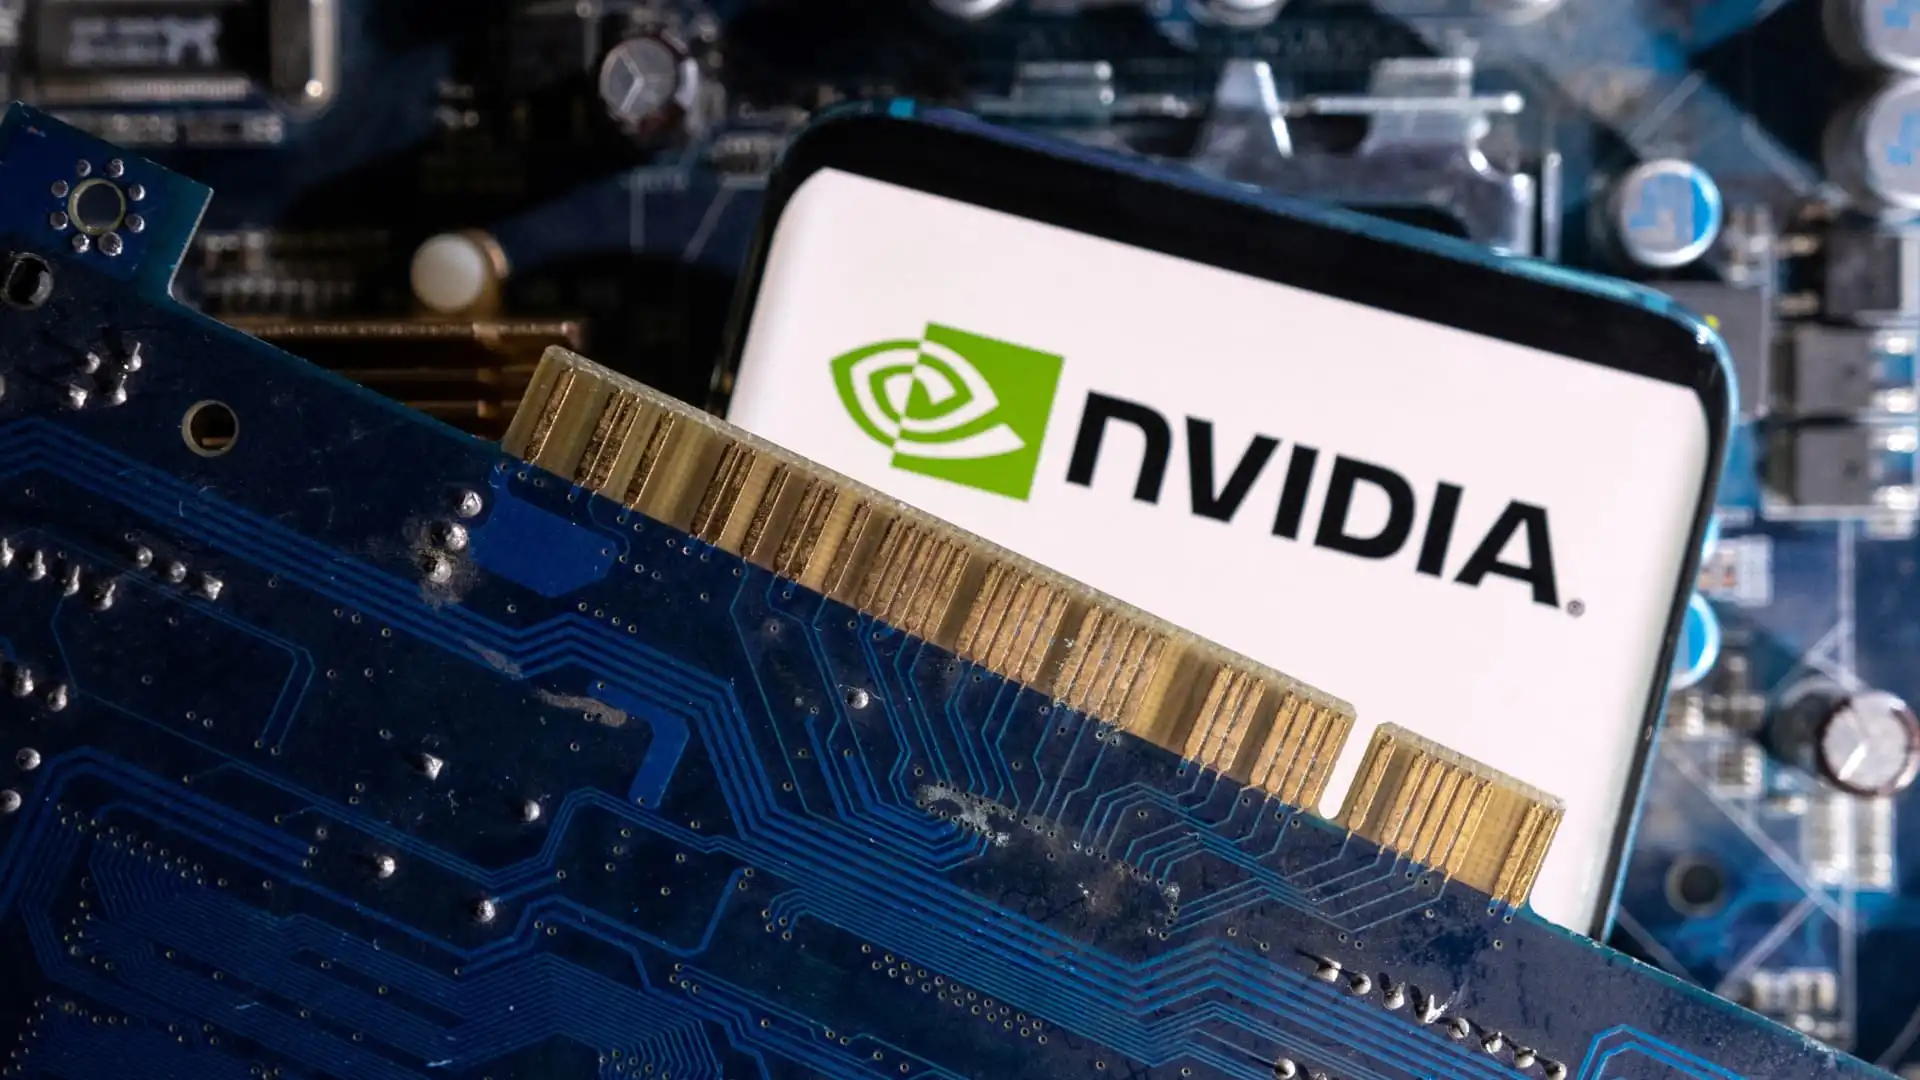 Fidelity portfolio manager highlights Nvidia's strong competitive advantage and potential for continued growth